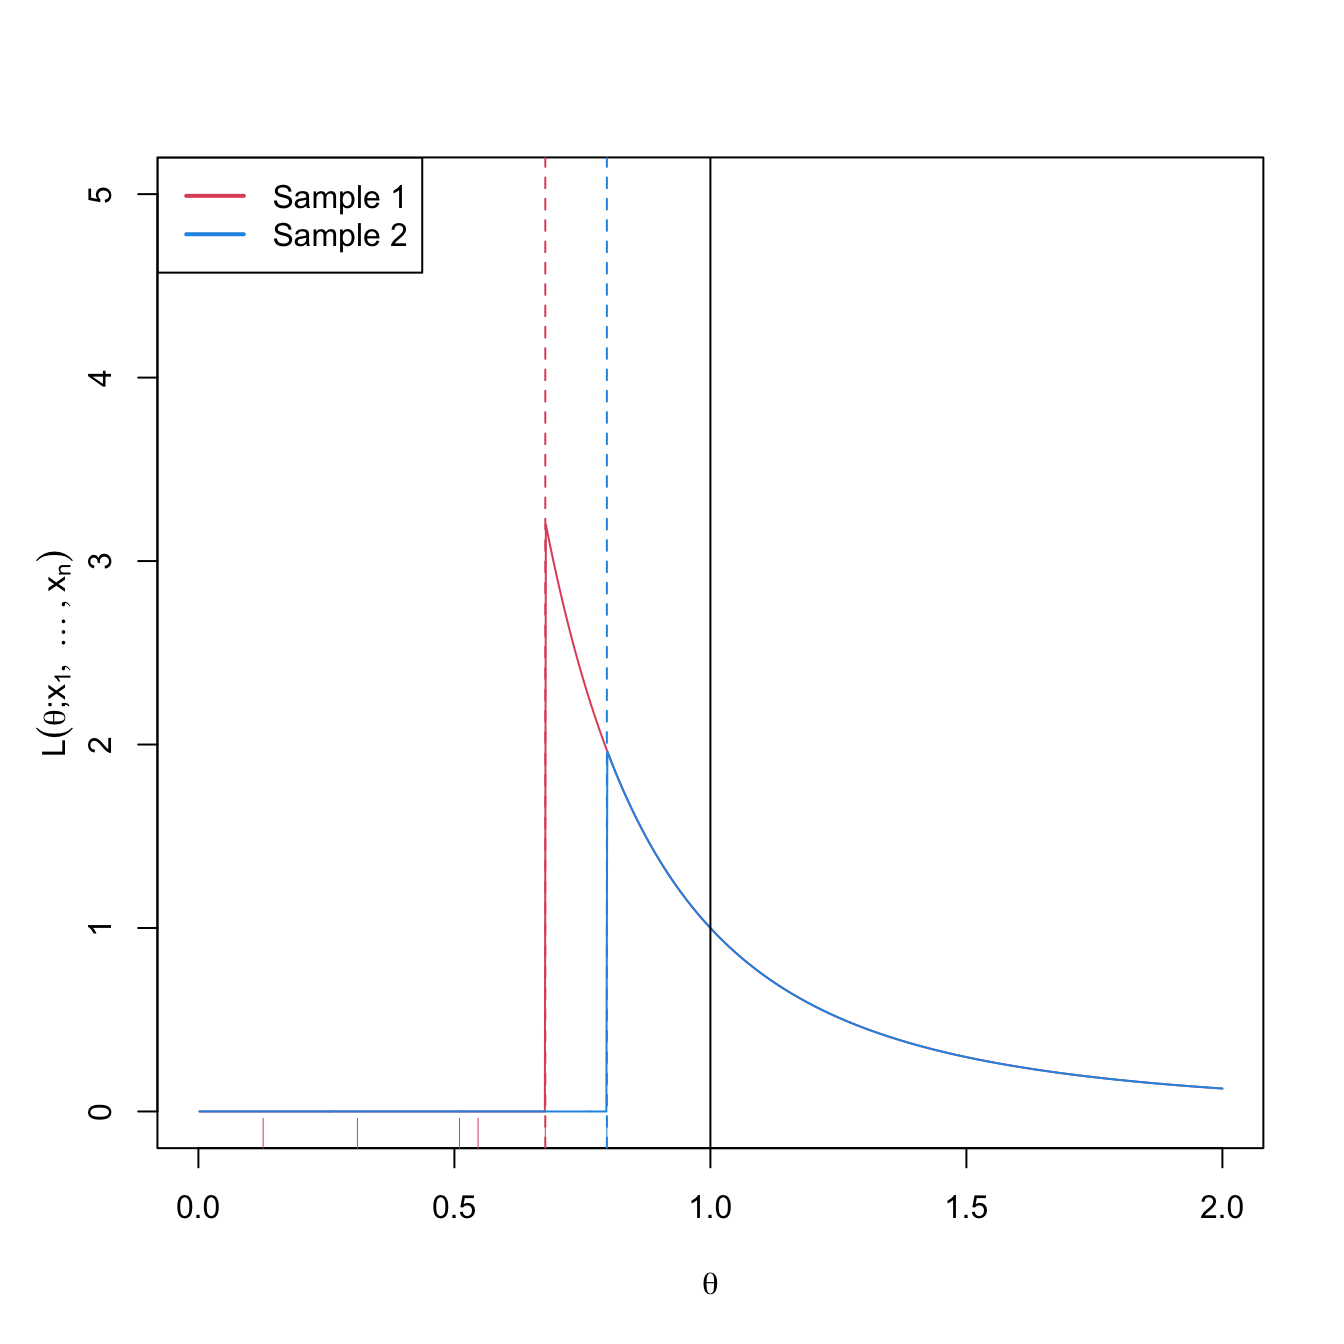 Likelihood \(\mathcal{L}(\theta;x_1,\ldots,x_n)\) as a function of \(\theta\in \lbrack0,1\rbrack\) for \(\mathcal{U}(0,\theta),\) \(\theta=1,\) and two different samples (red and blue) with \(n=3.\) The dashed vertical lines represent \(\hat{\theta}_{\mathrm{MLE}}=x_{(n)}\) (for the red and blue samples) and \(\theta=1\) is shown in black. The ticks on the horizontal axis represent the two samples.